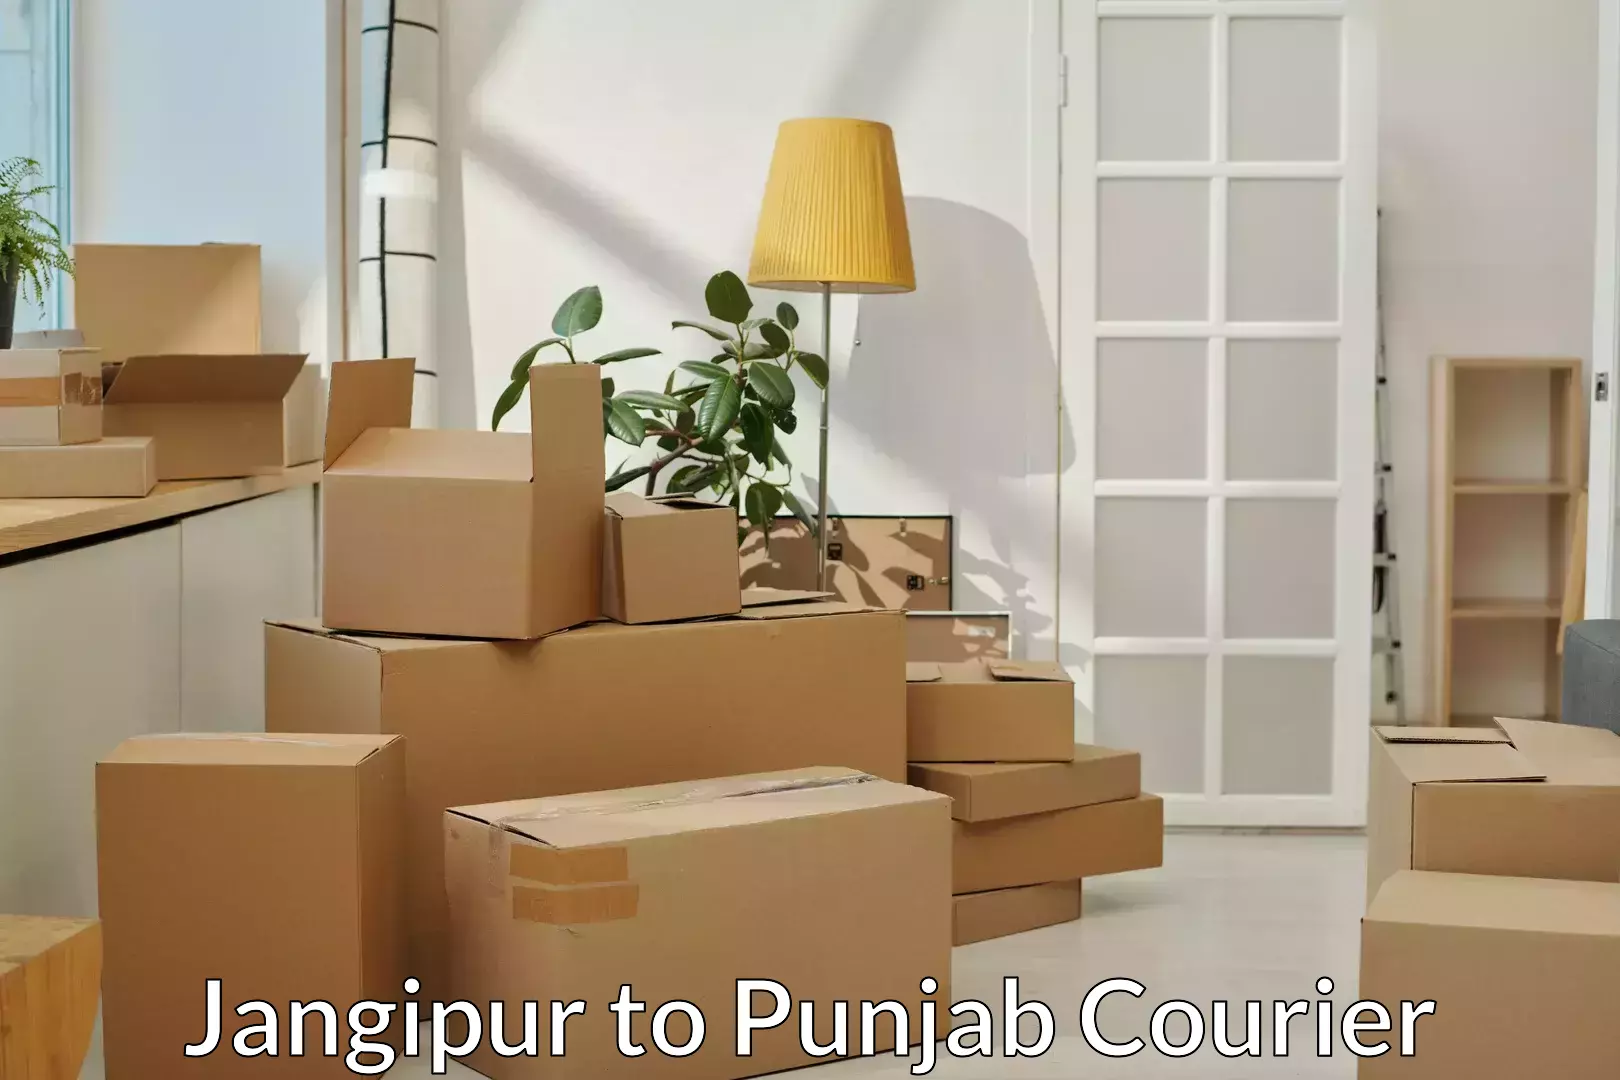 Hassle-free relocation Jangipur to Sirhind Fatehgarh